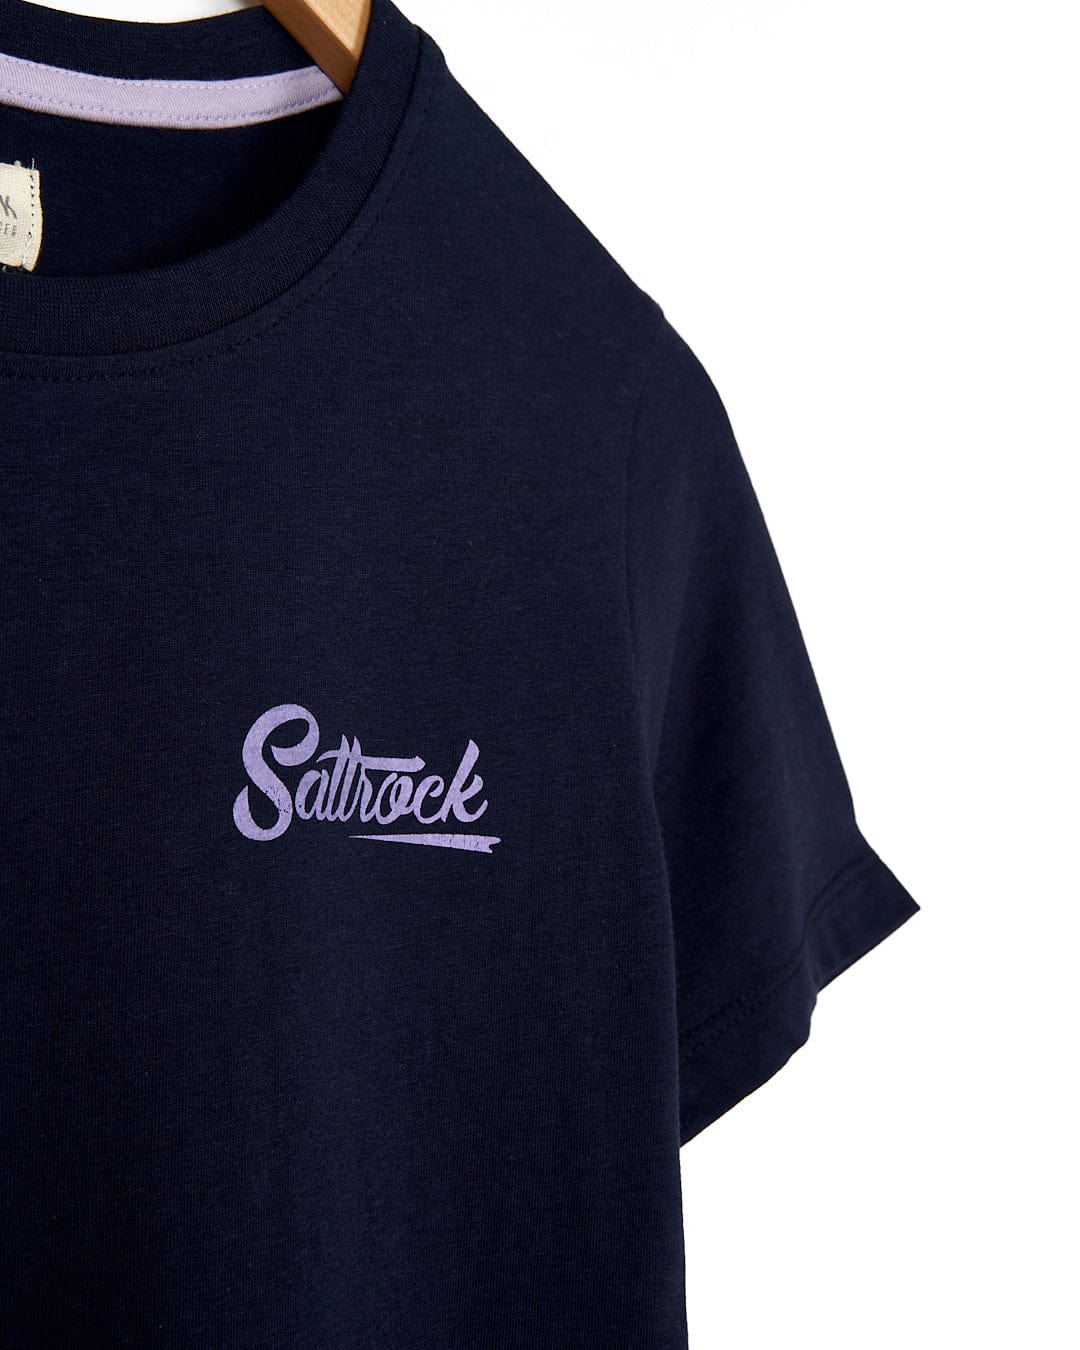 A Trademark - Womens Short Sleeve T-Shirt - Navy with the brand name Saltrock on it.